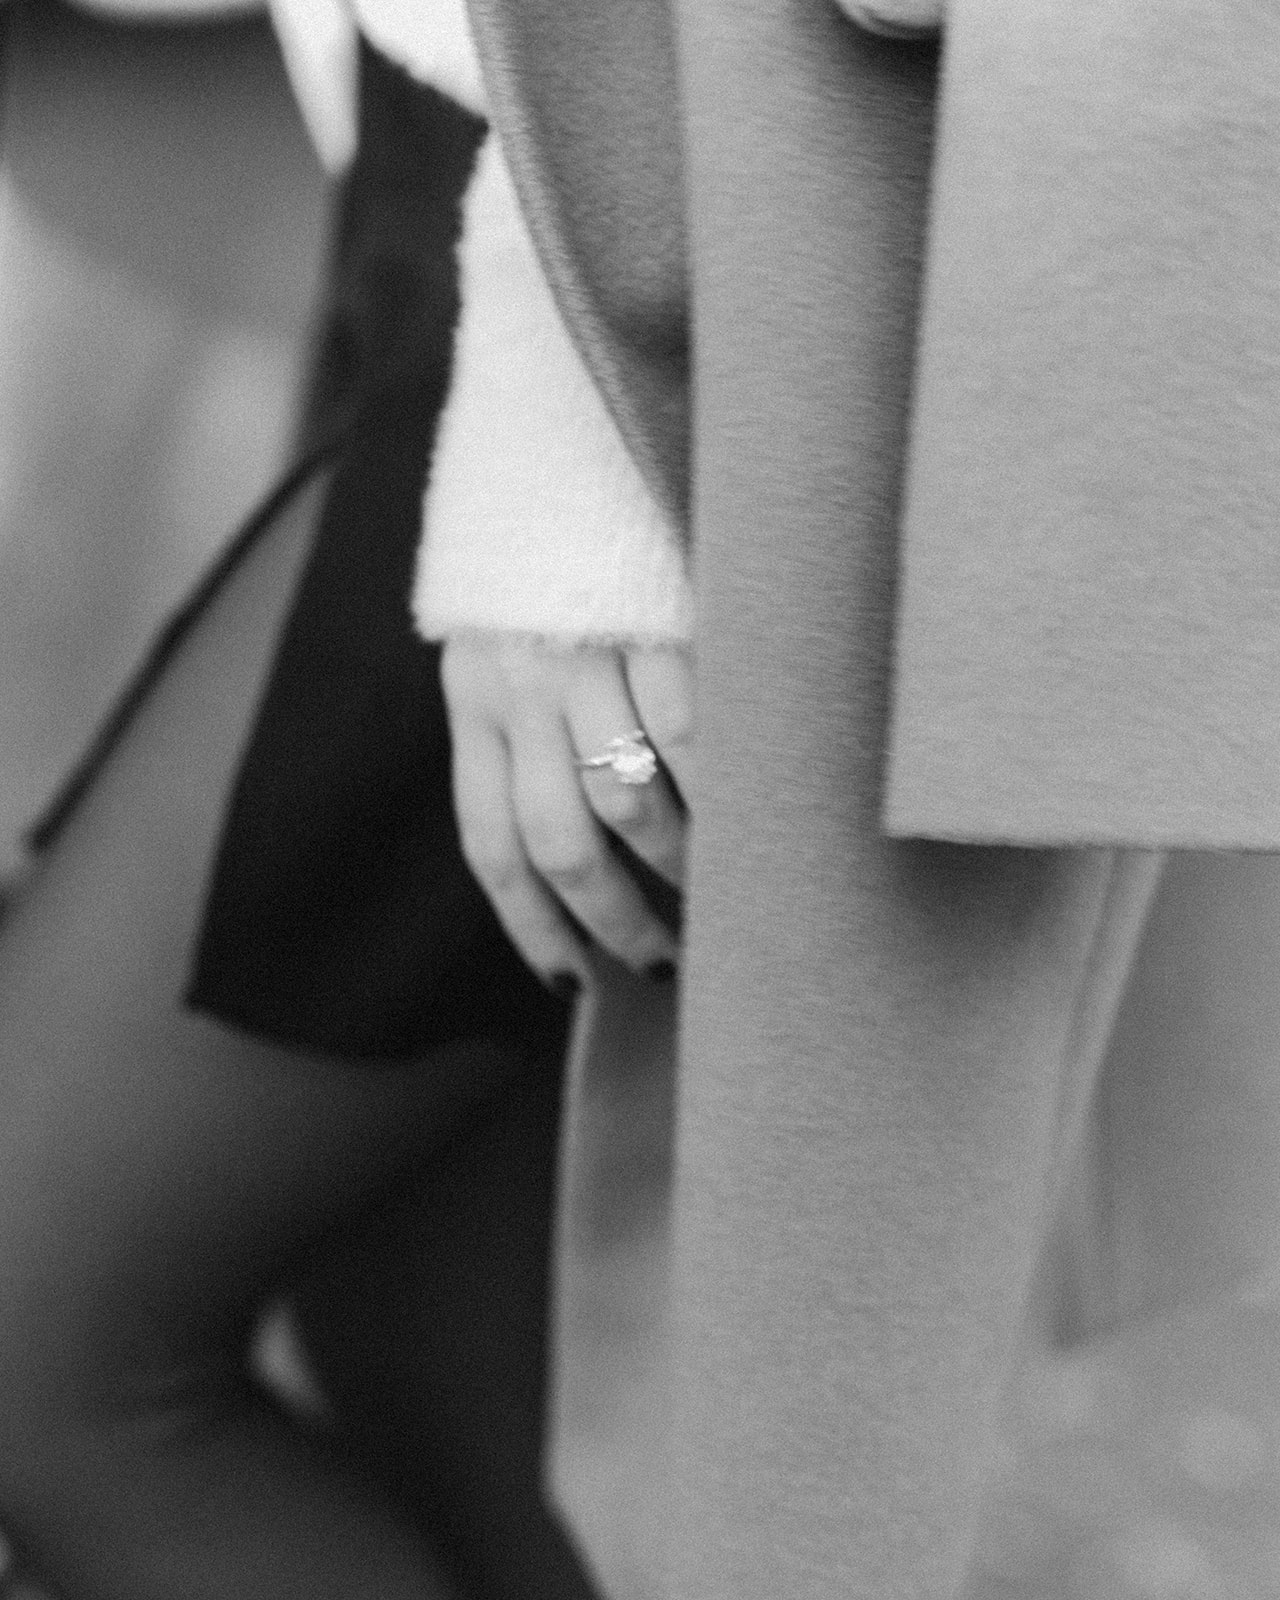 Black and white engagement proposal